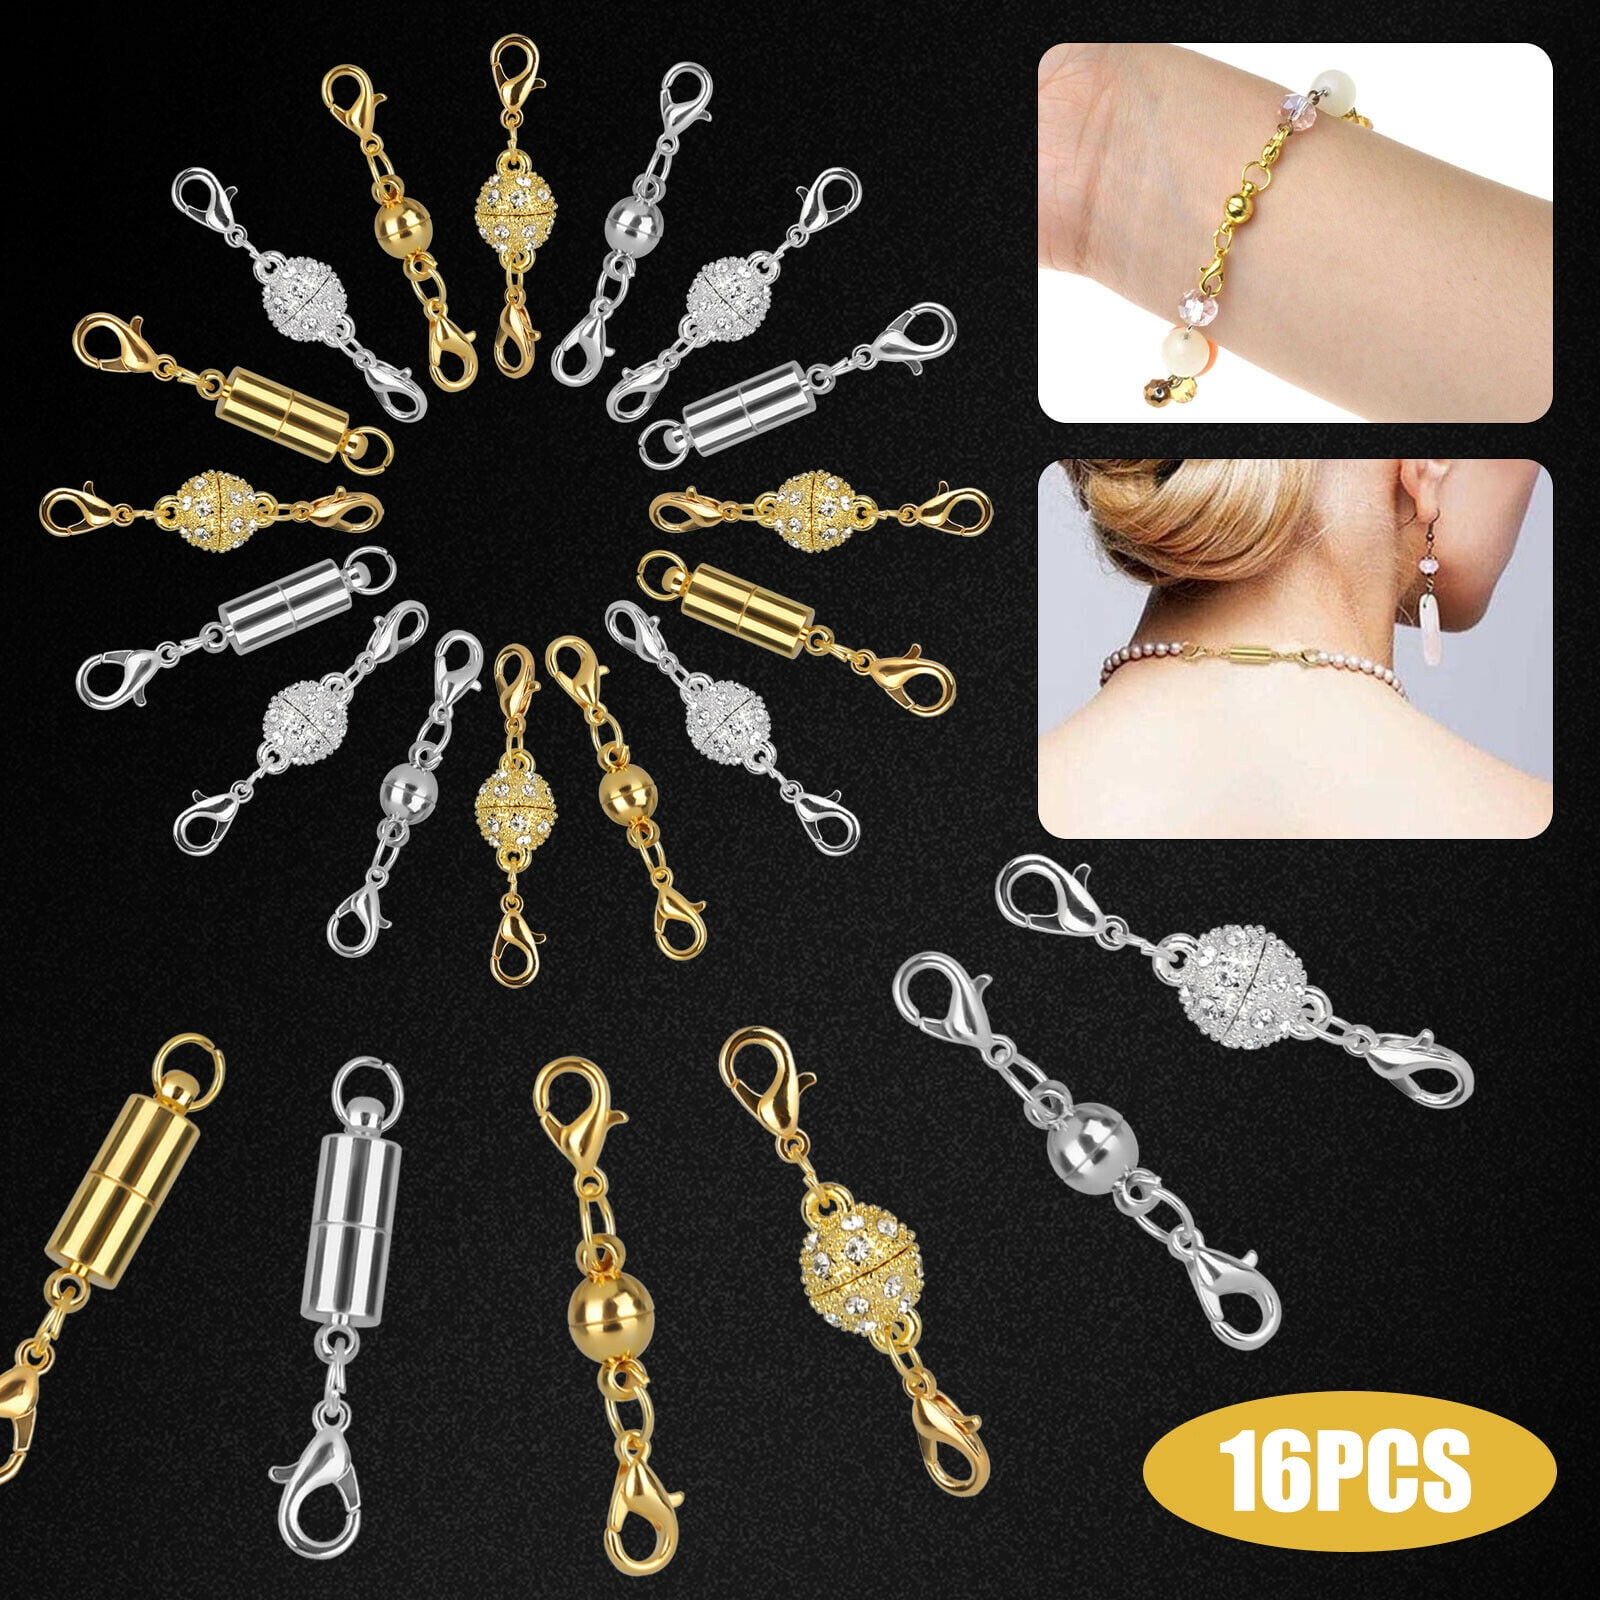 10 pc Magnetic Clasps Hooks Bracelet Necklace Connectors For DIY Jewelry Making 